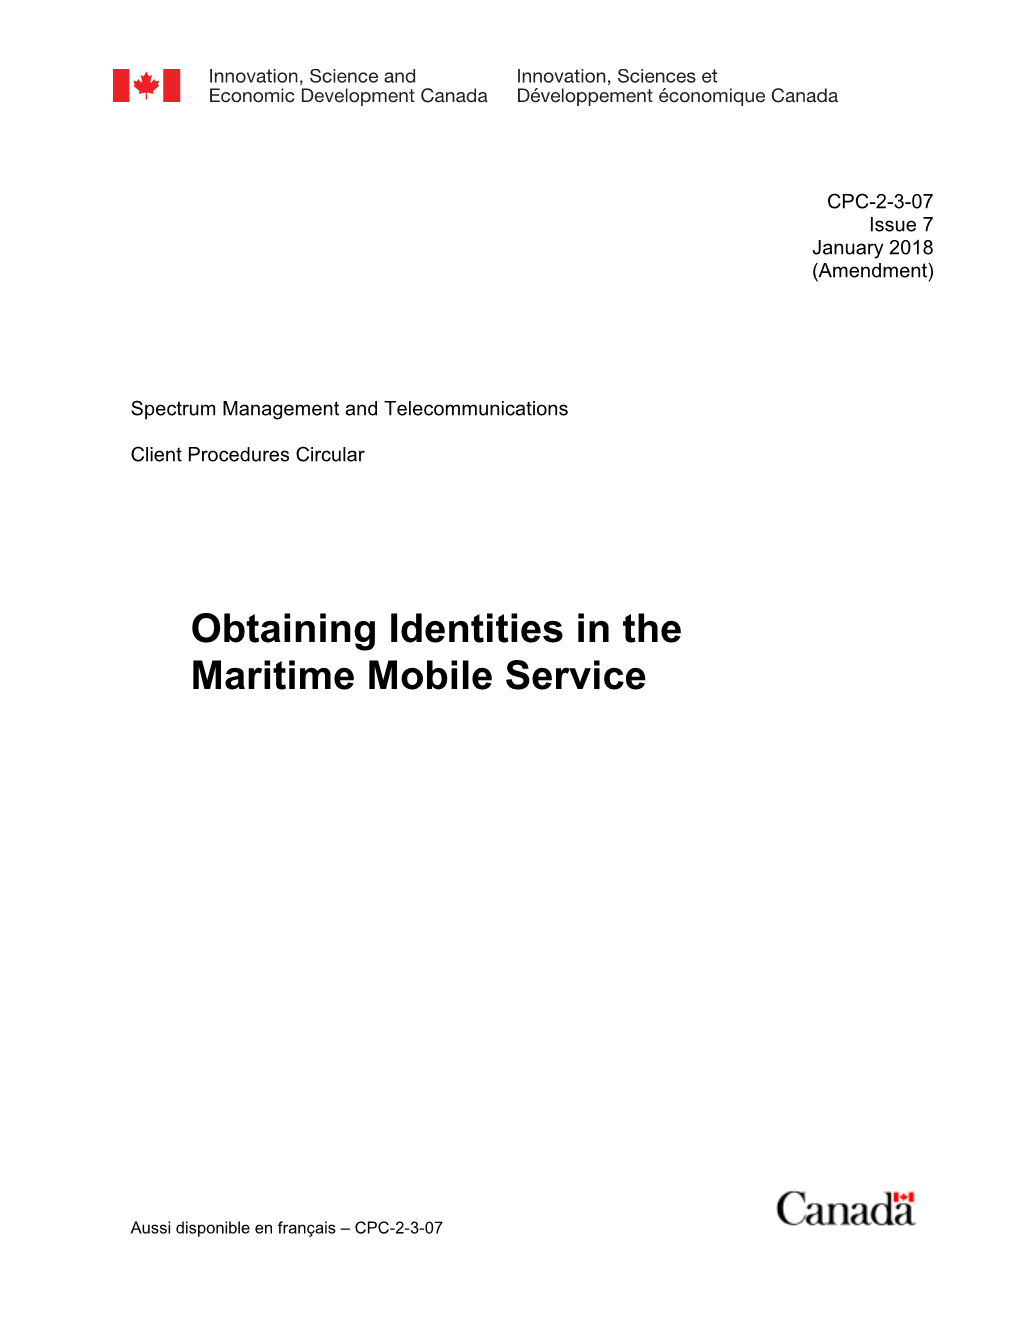 CPC-2-3-07 — Obtaining Identities in the Maritime Mobile Service